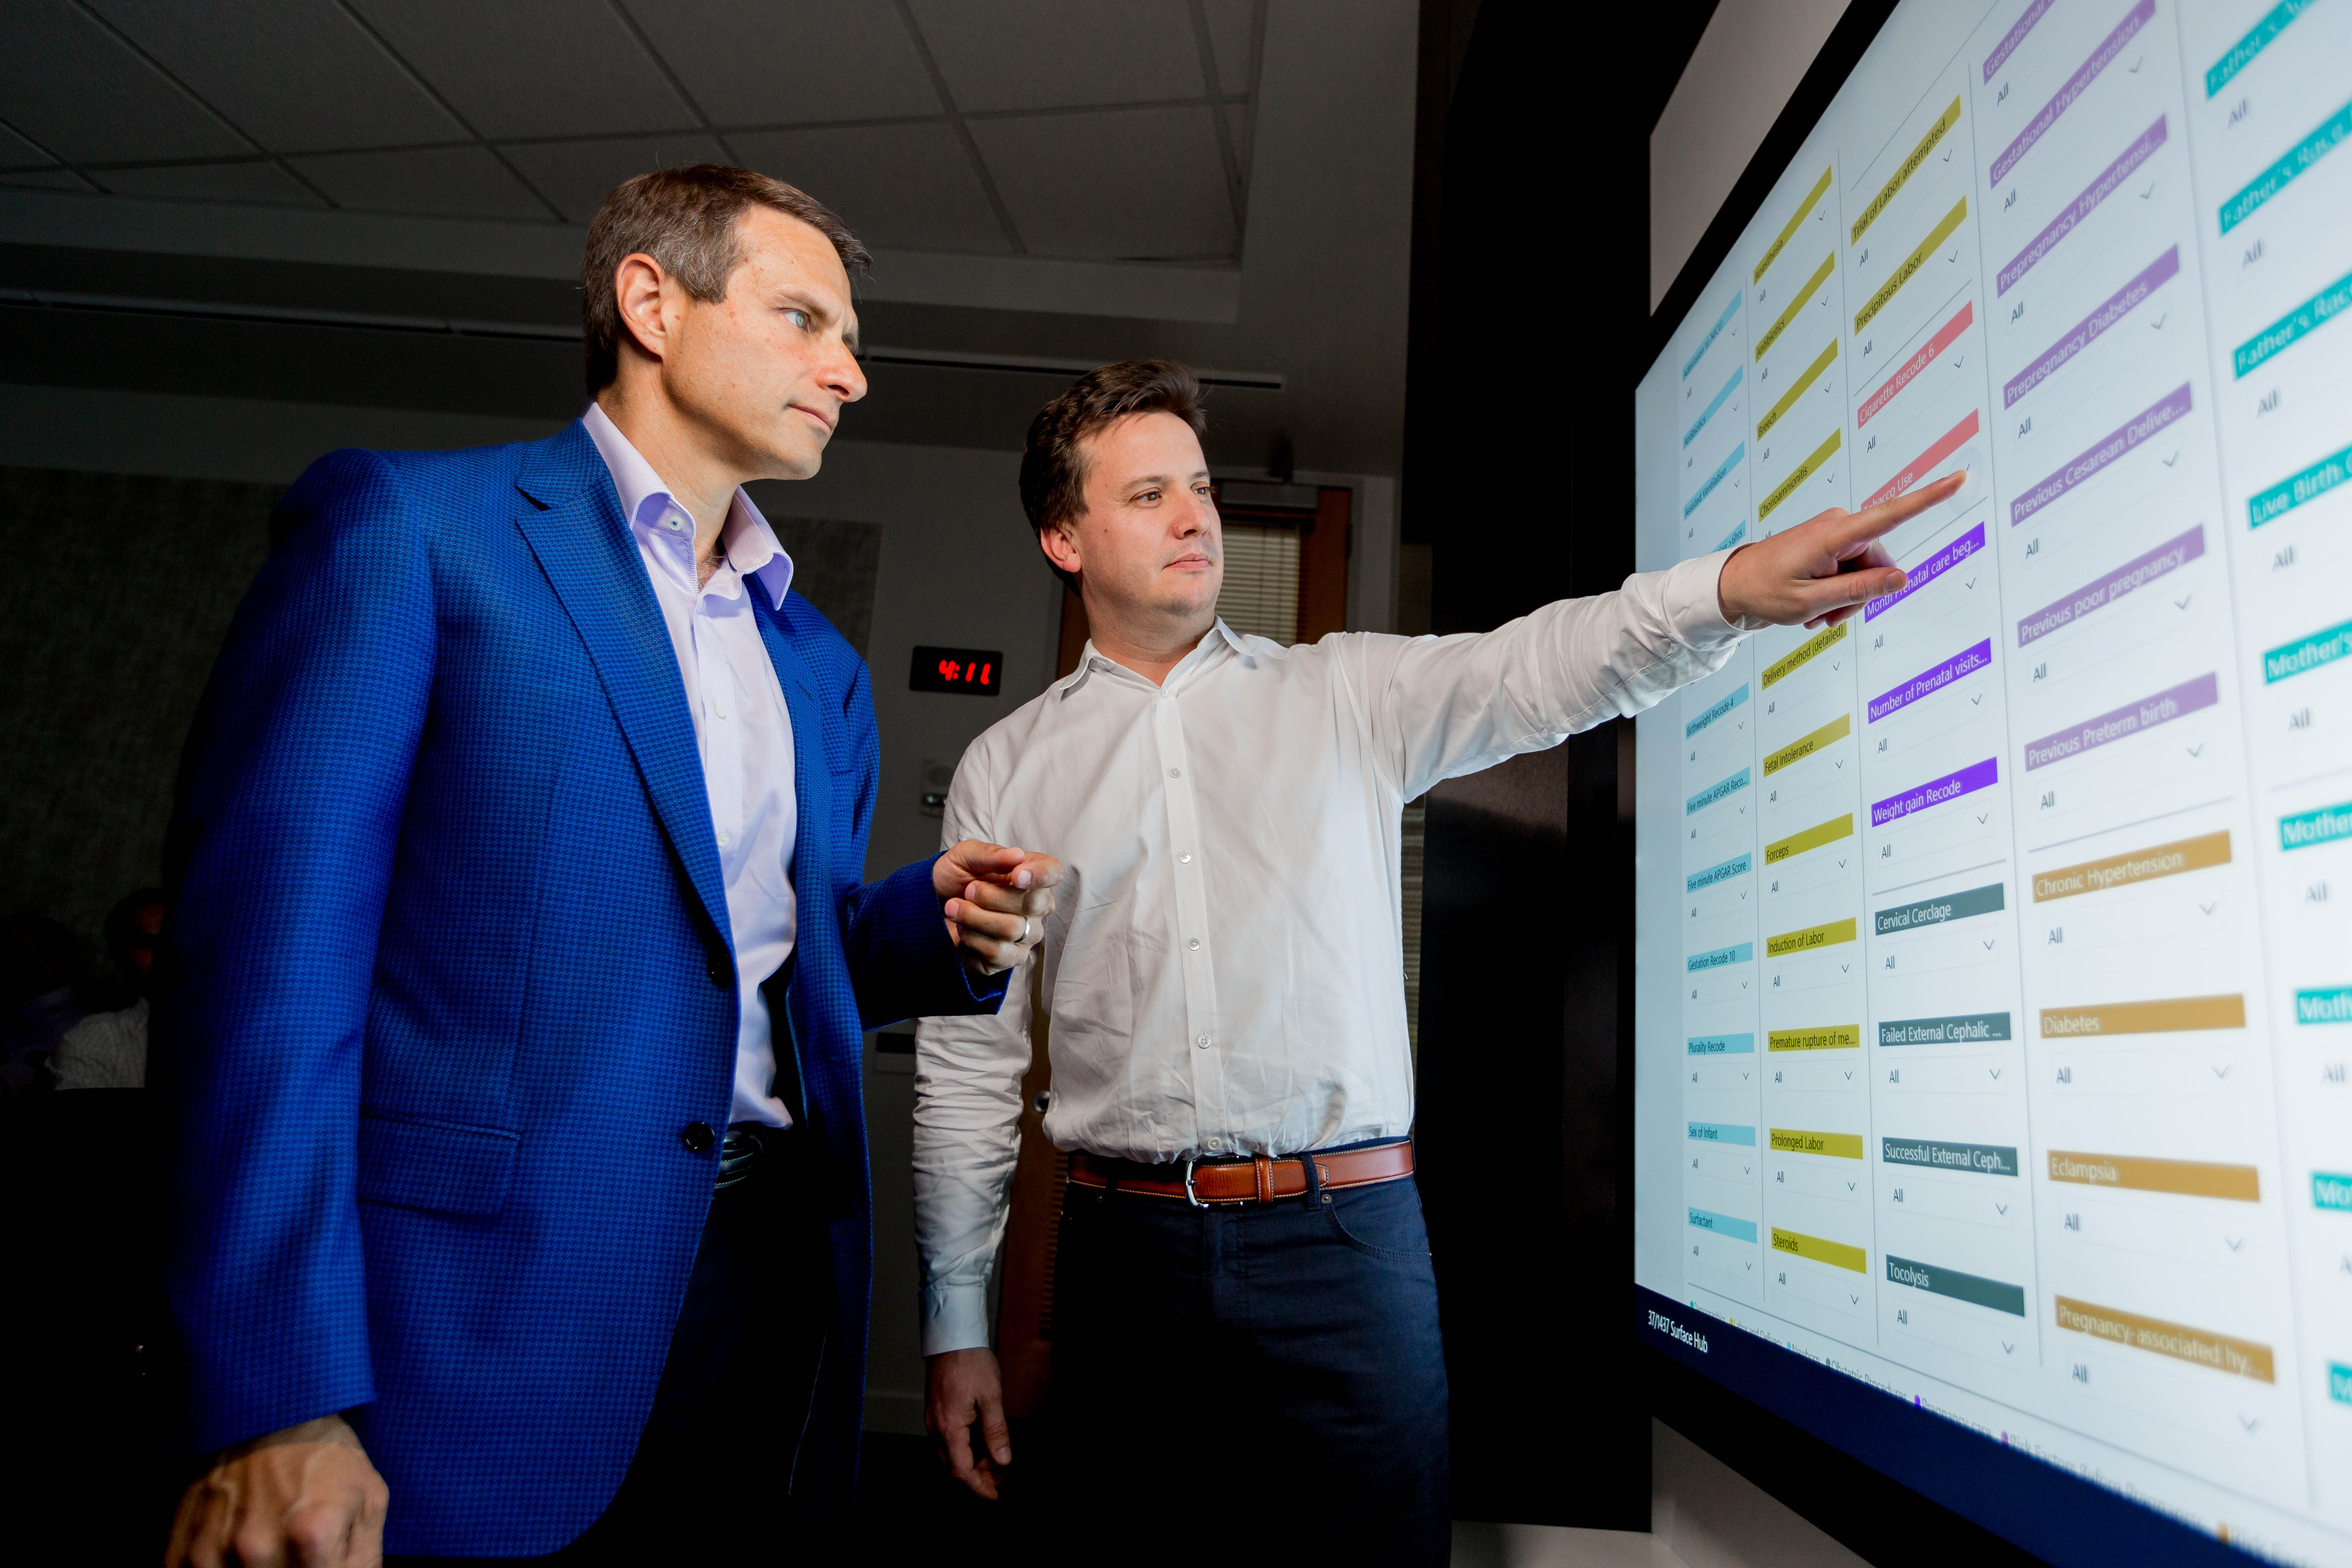 John Kahan, left, and Juan Lavista Flores, look over some of the SIDS-related correlations generated by the research tool developed by Microsoft volunteers